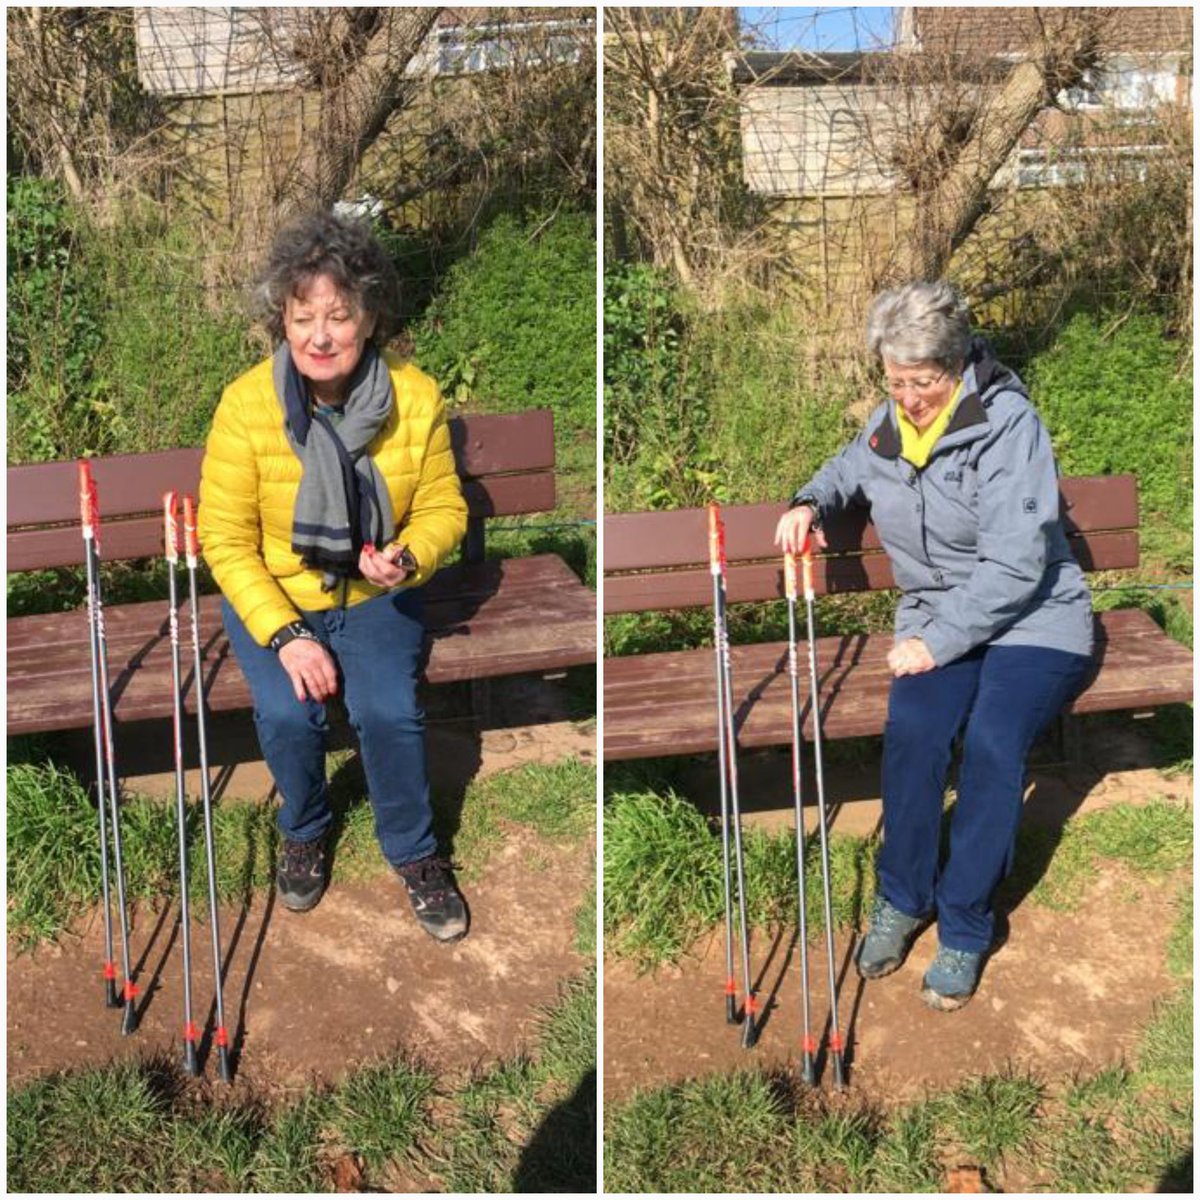 Pushing poles in King George V Playing Fields. Two of my clients sharing photos out with their poles 💚
#ExercisingOutdoors #NordicWalking #Day6 #nature #hope #Exeter #Walking #noticing #BritNW